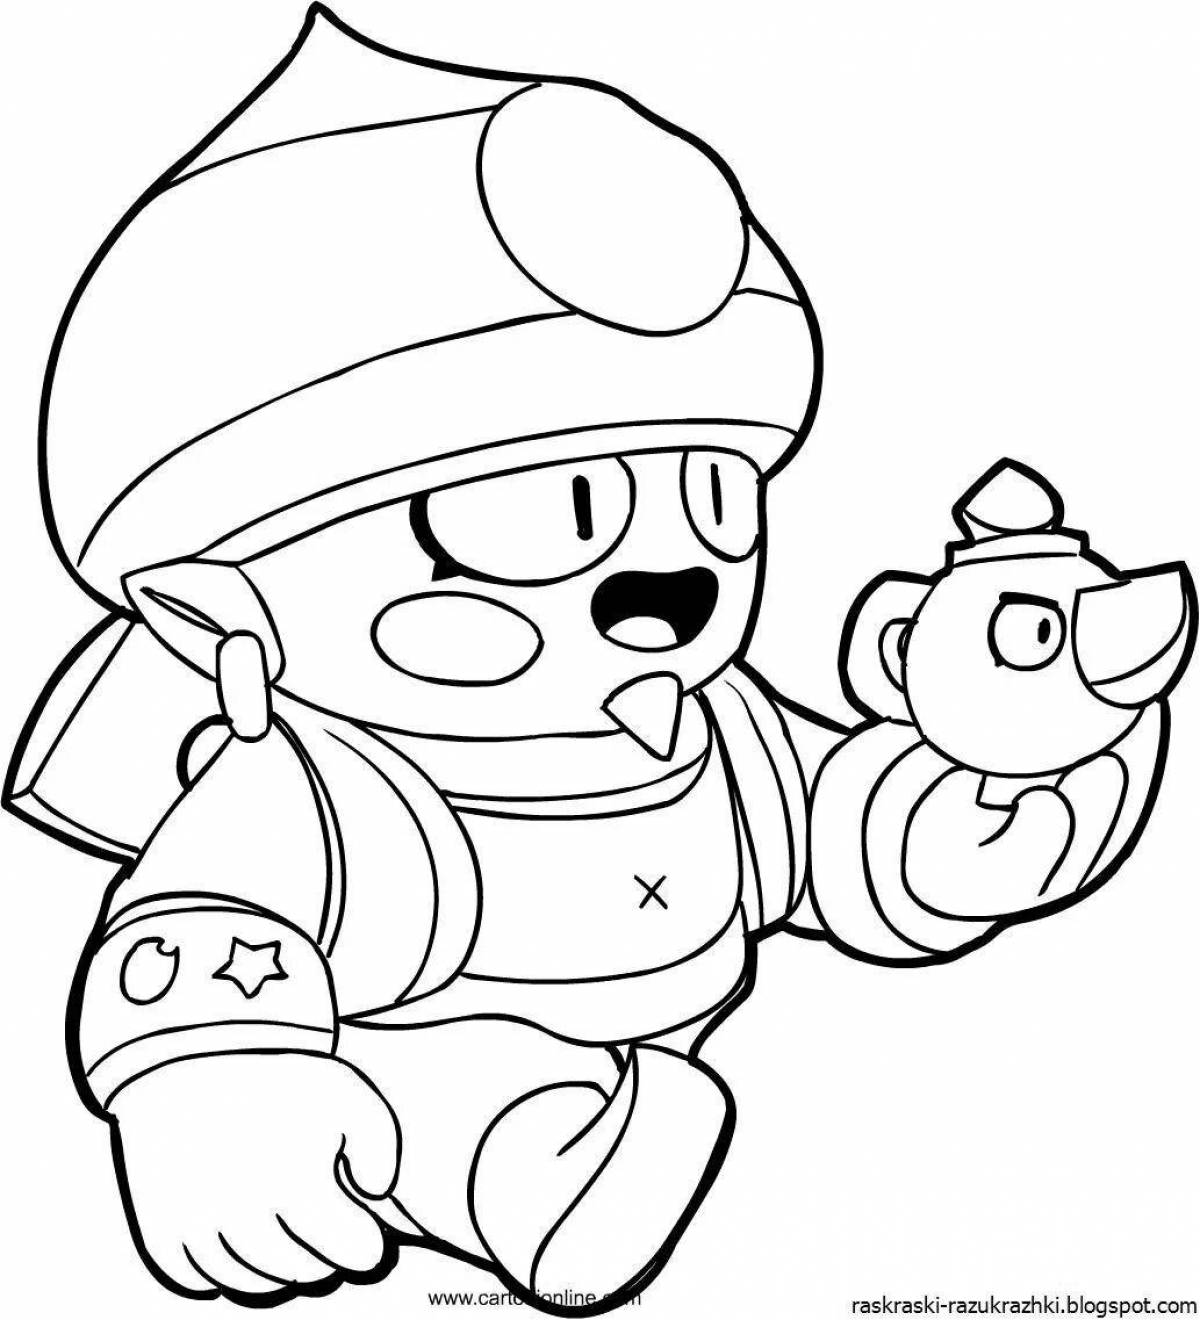 Dynamike peaceful coloring